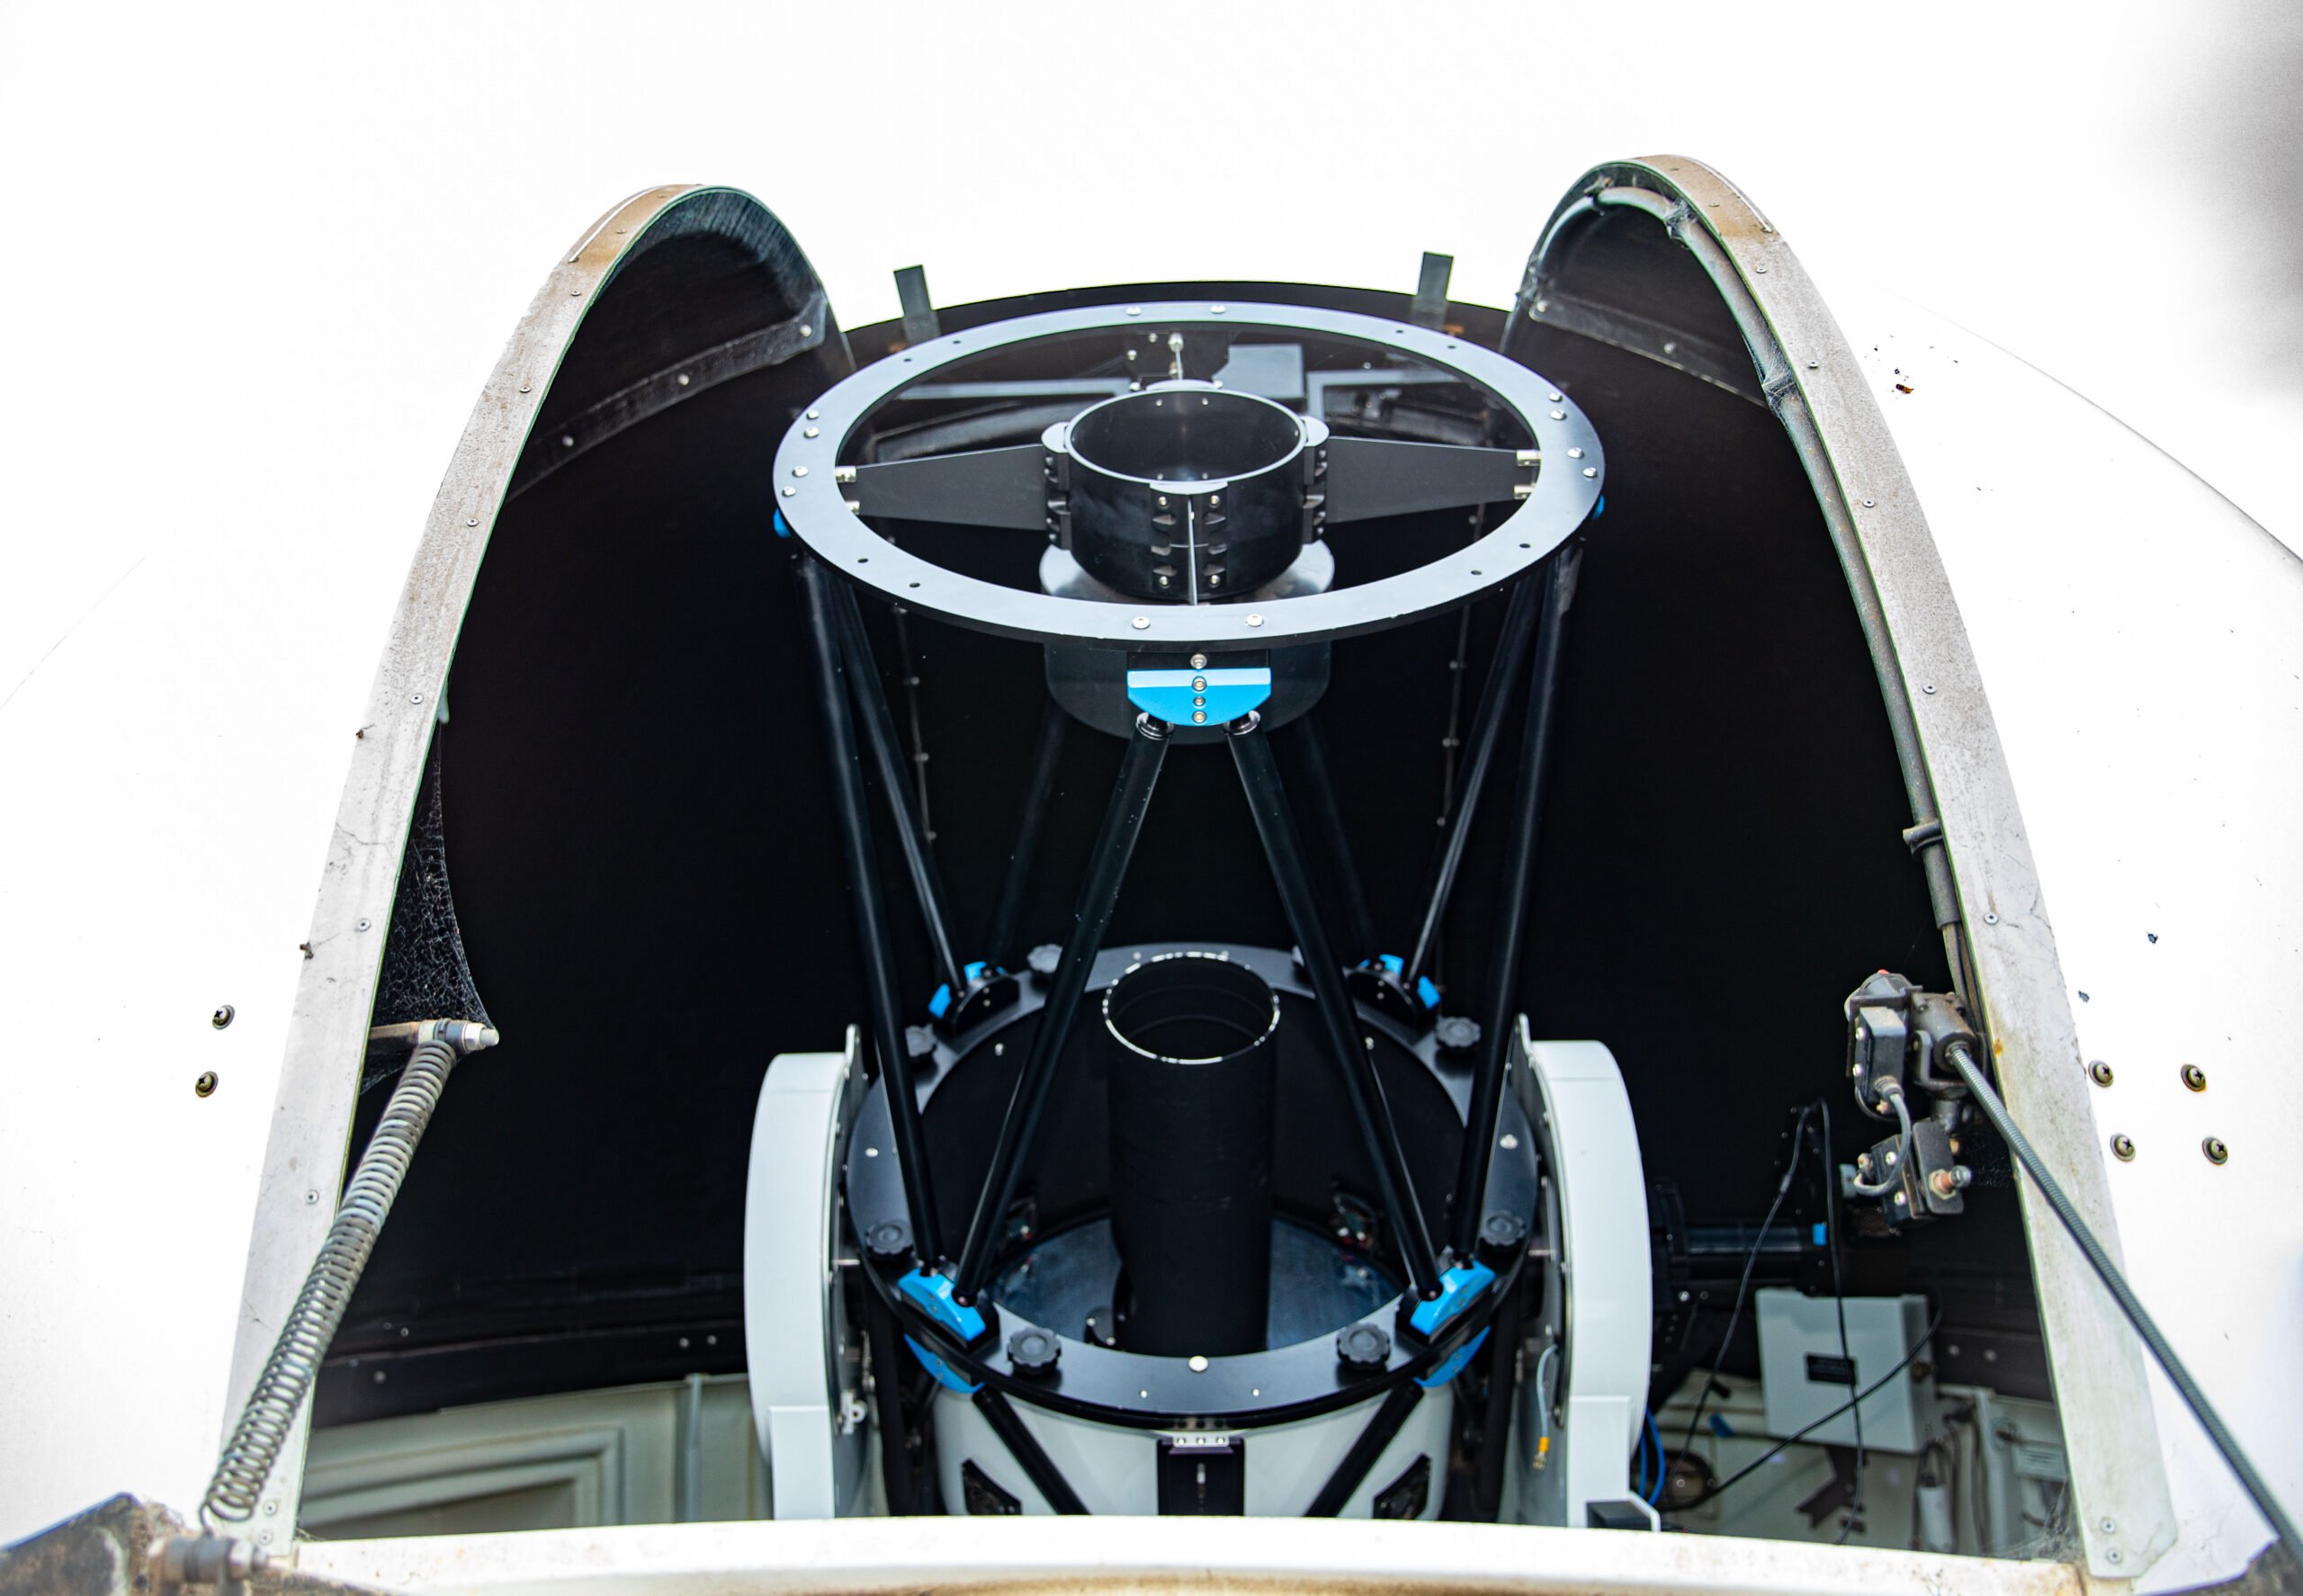 An optical comms terminal peeks out of an observatory-style dome.